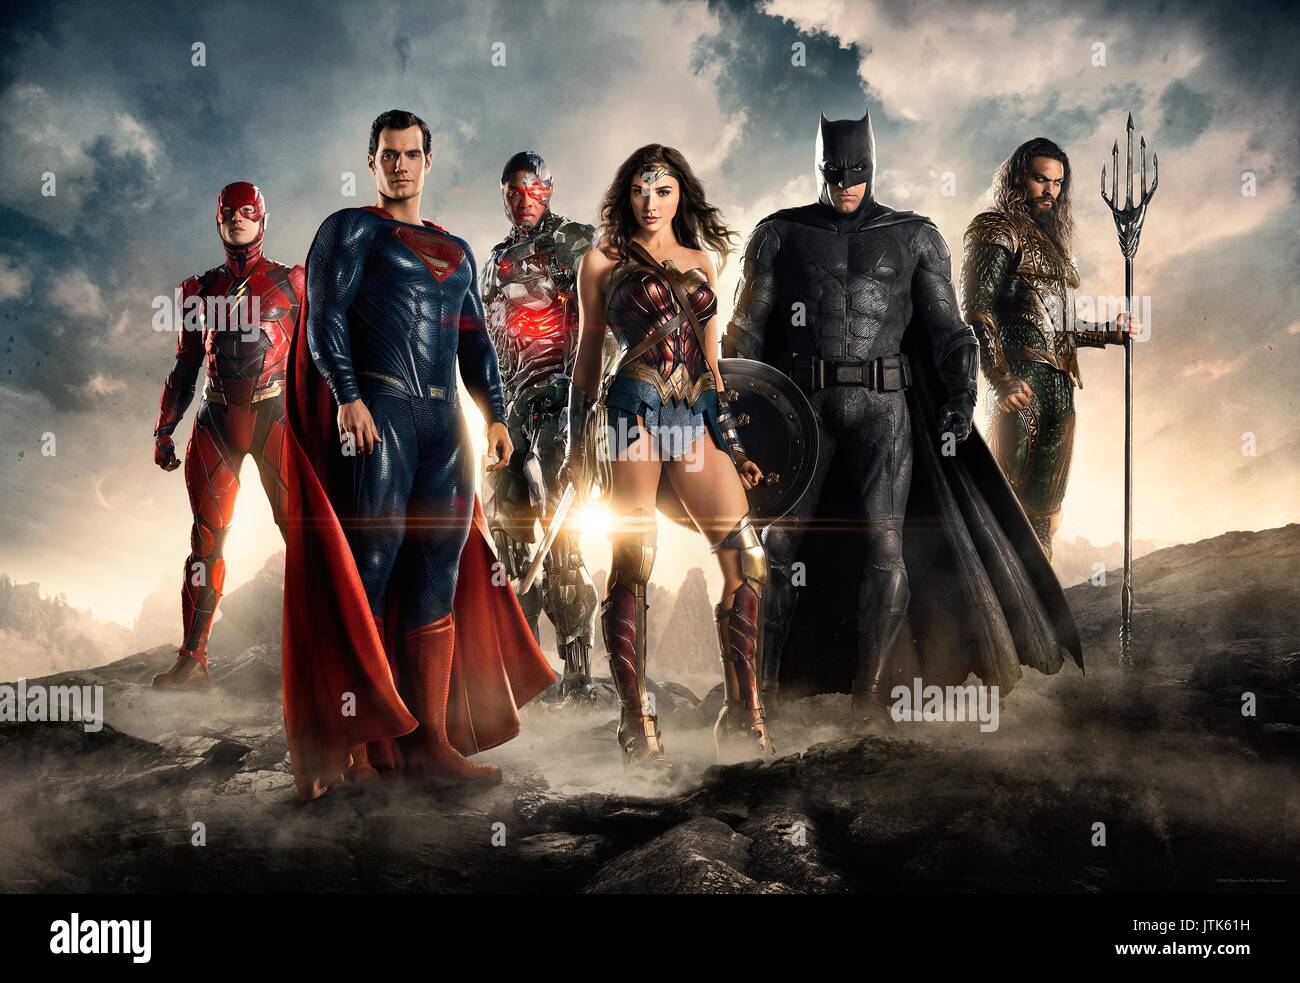 RELEASE DATE: November 17, 2017 TITLE: Justice League STUDIO: DC Entertainment DIRECTOR: Zack Snyder PLOT: Fueled by his restored faith in humanity and inspired by Superman's selfless act, Bruce Wayne enlists the help of his newfound ally, Diana Prince, to face an even greater enemy. STARRING: Henry Cavill as Clark Kent / Superman, Ezra Miller as Barry Allen / The Flash, Ben Affleck as Bruce Wayne / Batman, Gal Gadot as Diana Prince / Wonder Woman, Ray Fisher as Victor Stone / Cyborg, Jason Momoa as Arthur Curry / Aquaman poster art. (Credit Image: © DC Entertainment/Entertainment Pictures) Stock Photo